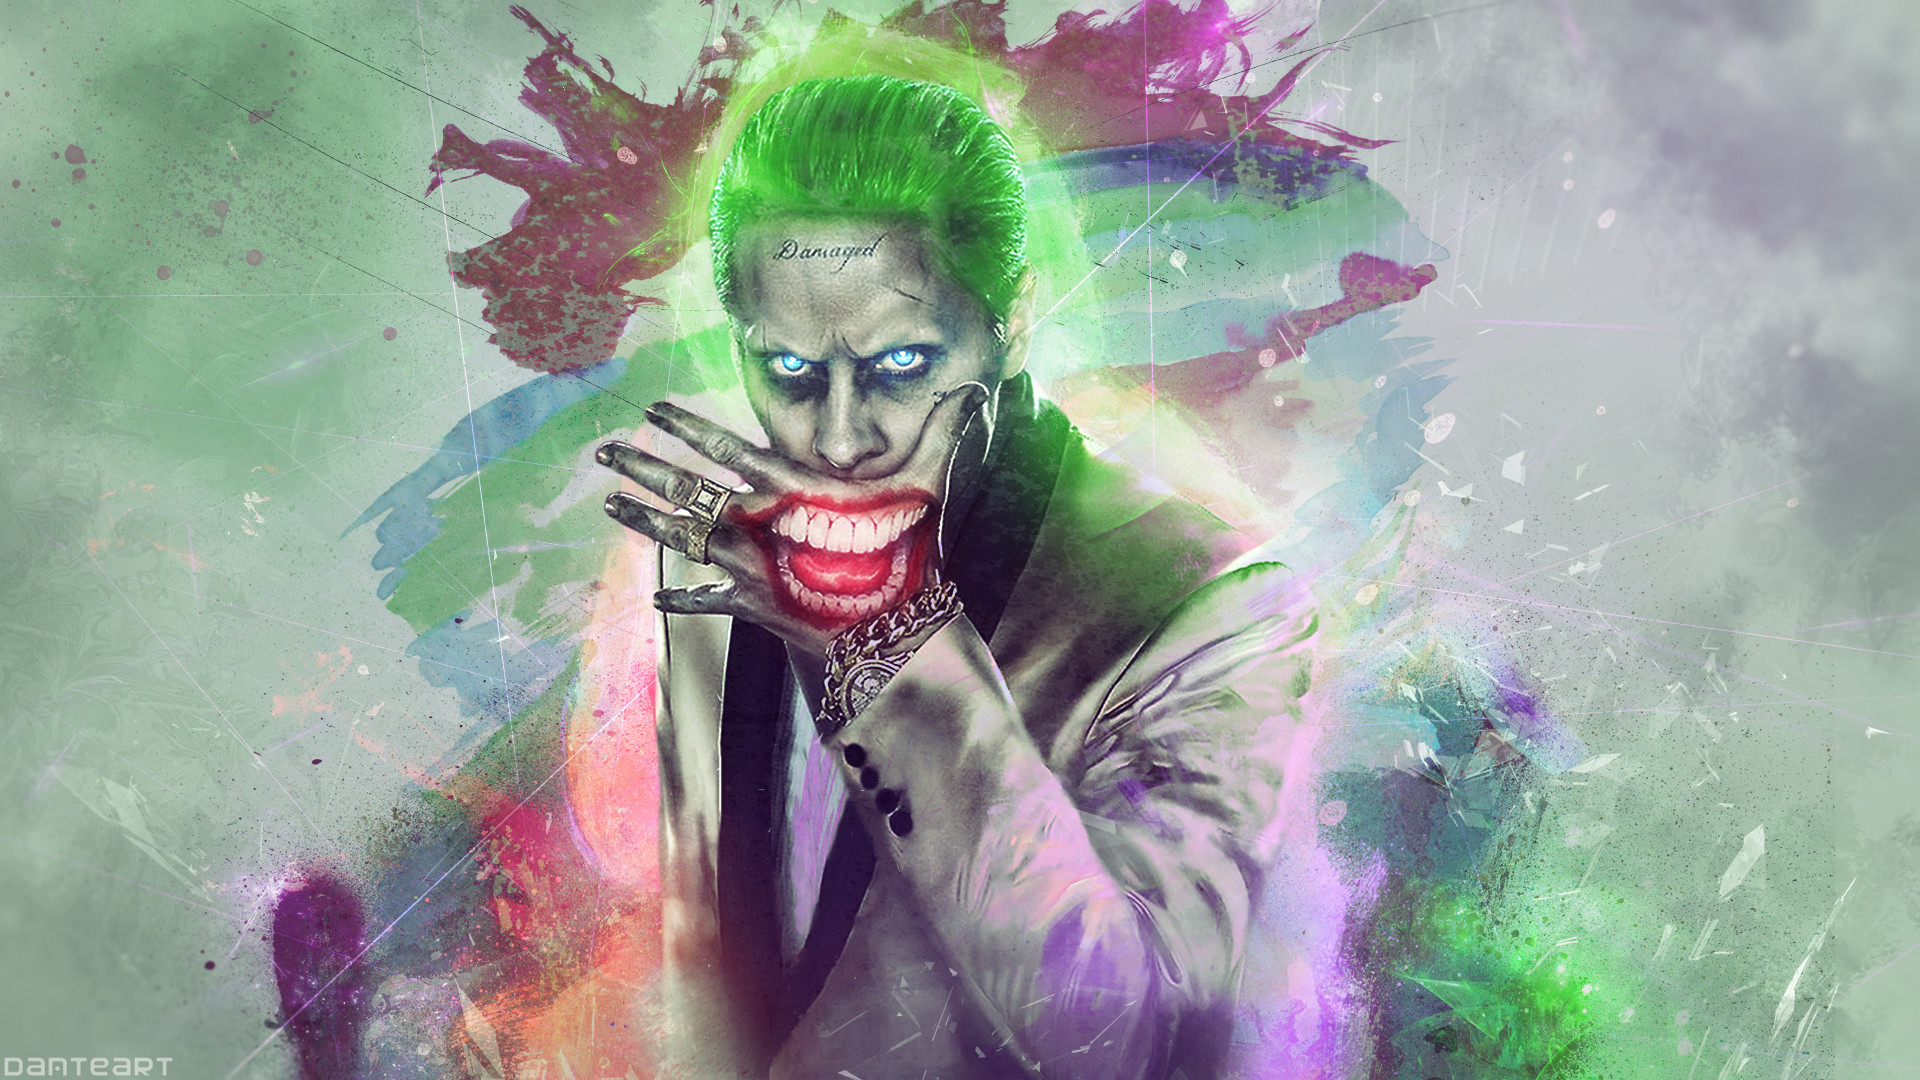 Suicide Squad The JOKER Wallpaper by DanteArtWallpapers Suicide Squad The JOKER Wallpaper by DanteArtWallpapers